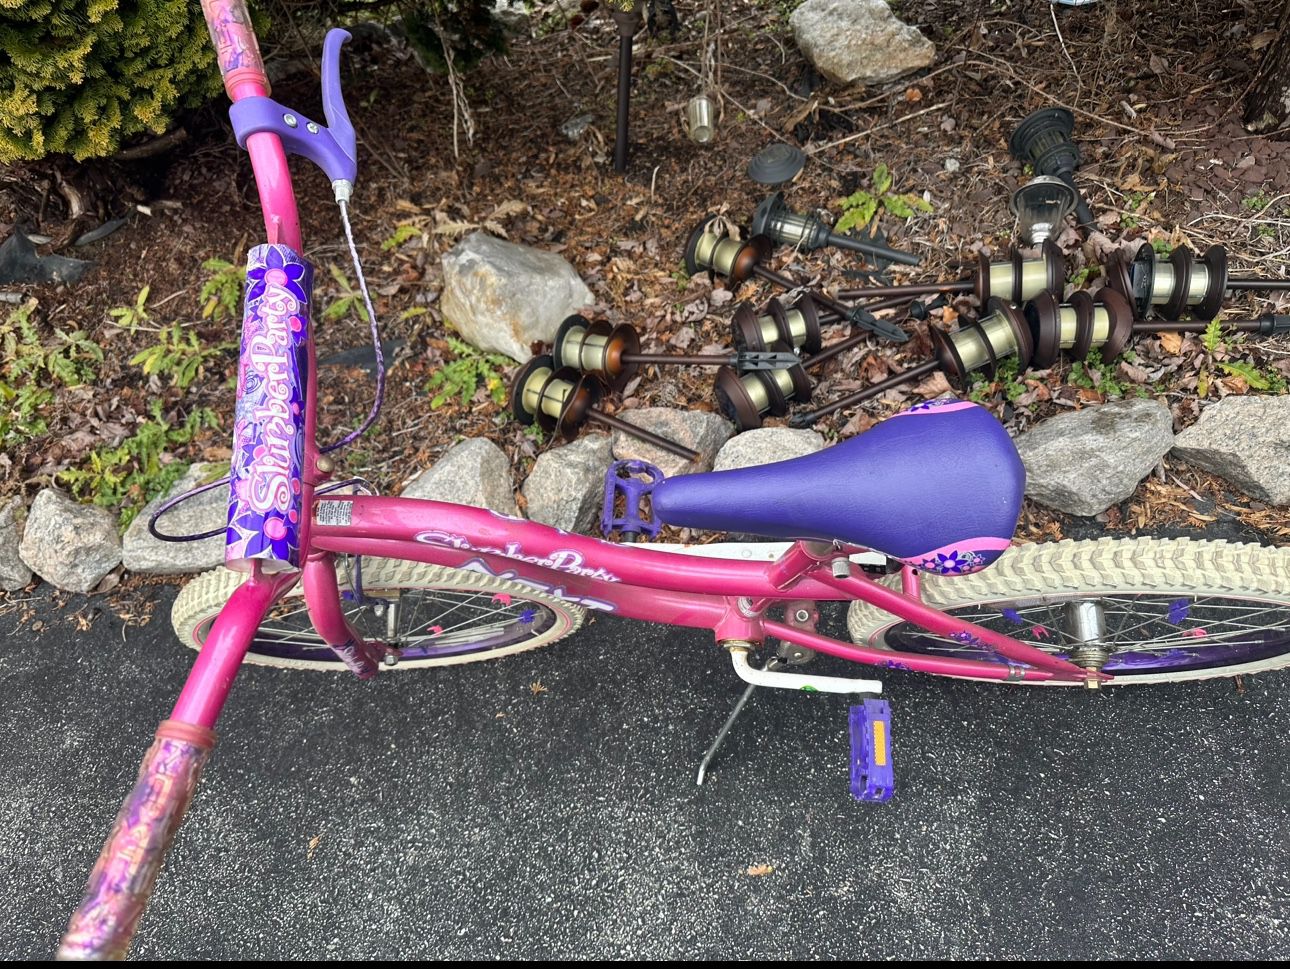 20” girls bike $39 / pickup today/ask me other items price please 